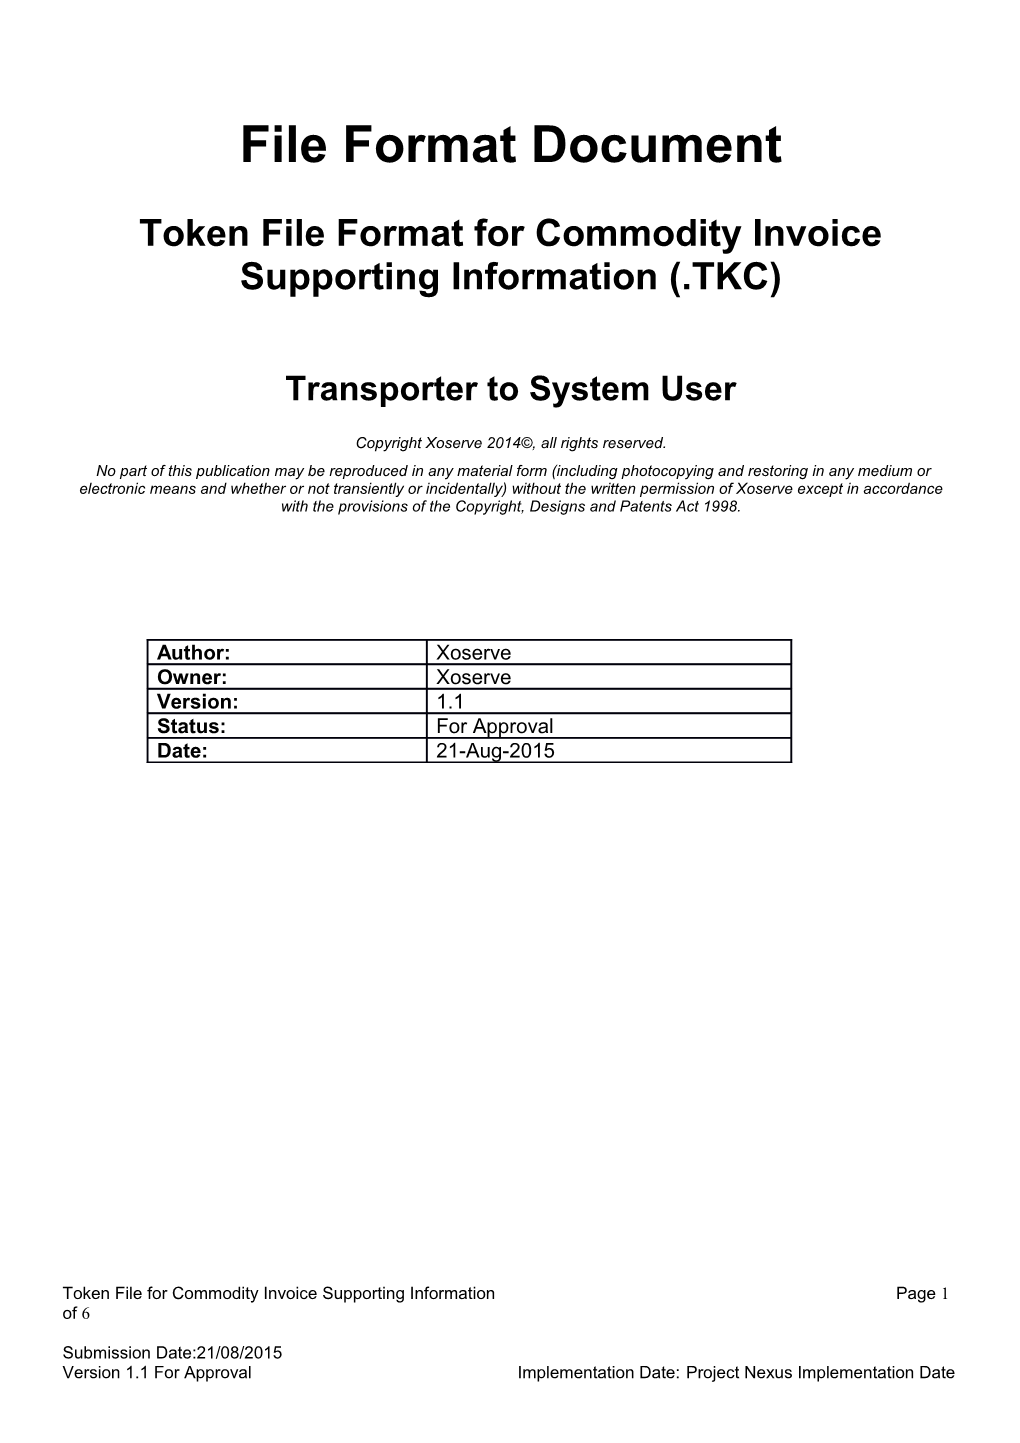 Token File Format for Commodity Invoice Supporting Information (.TKC)